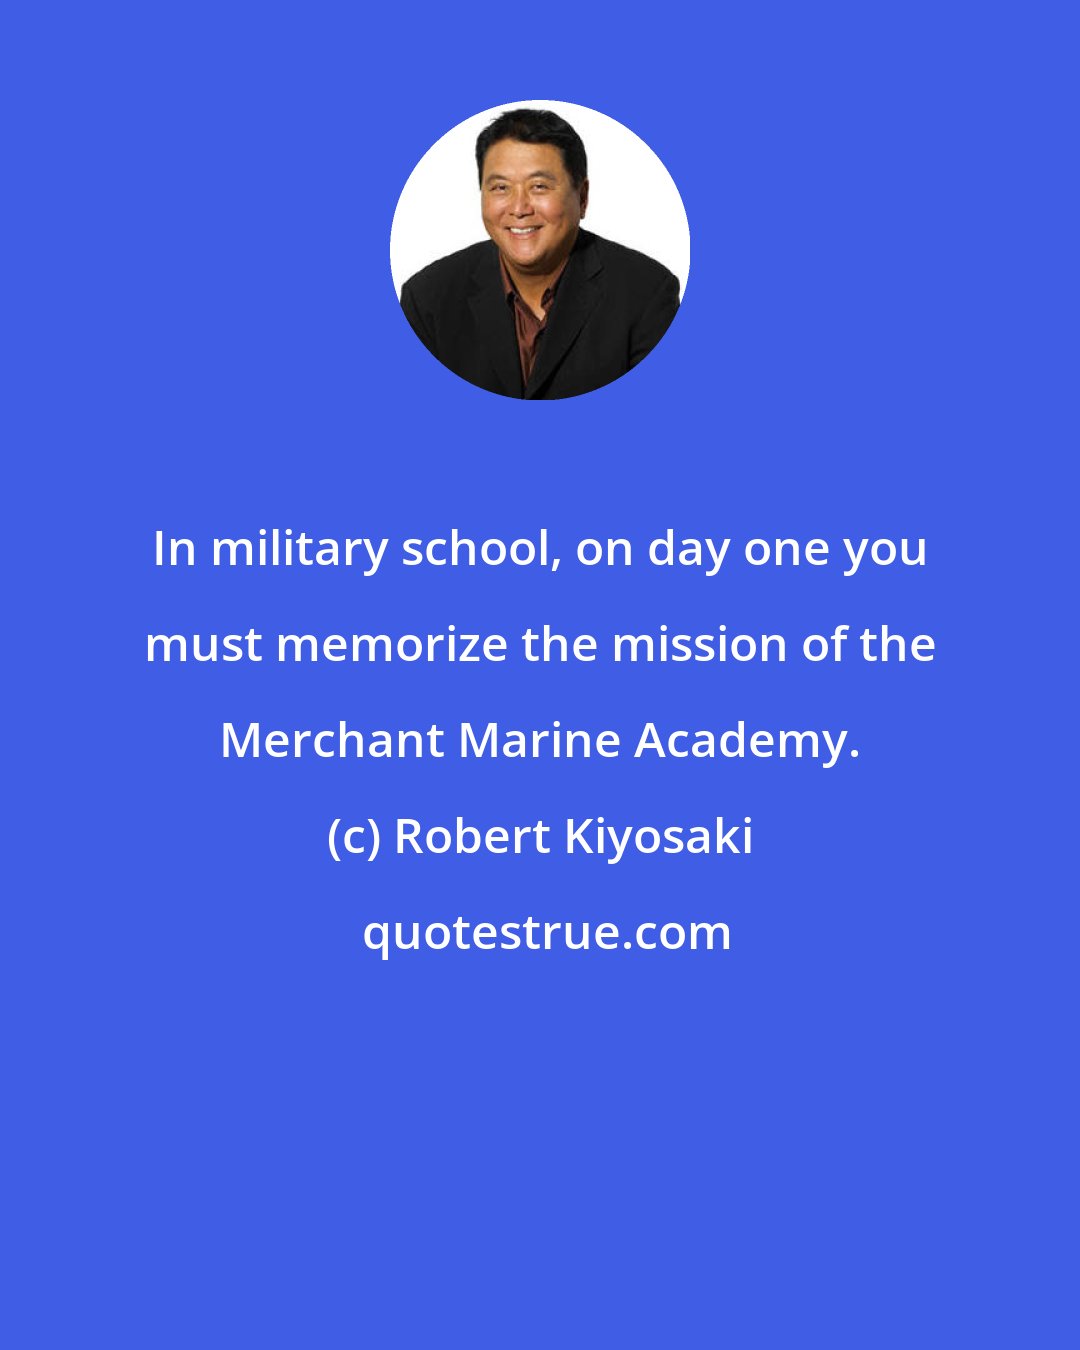 Robert Kiyosaki: In military school, on day one you must memorize the mission of the Merchant Marine Academy.